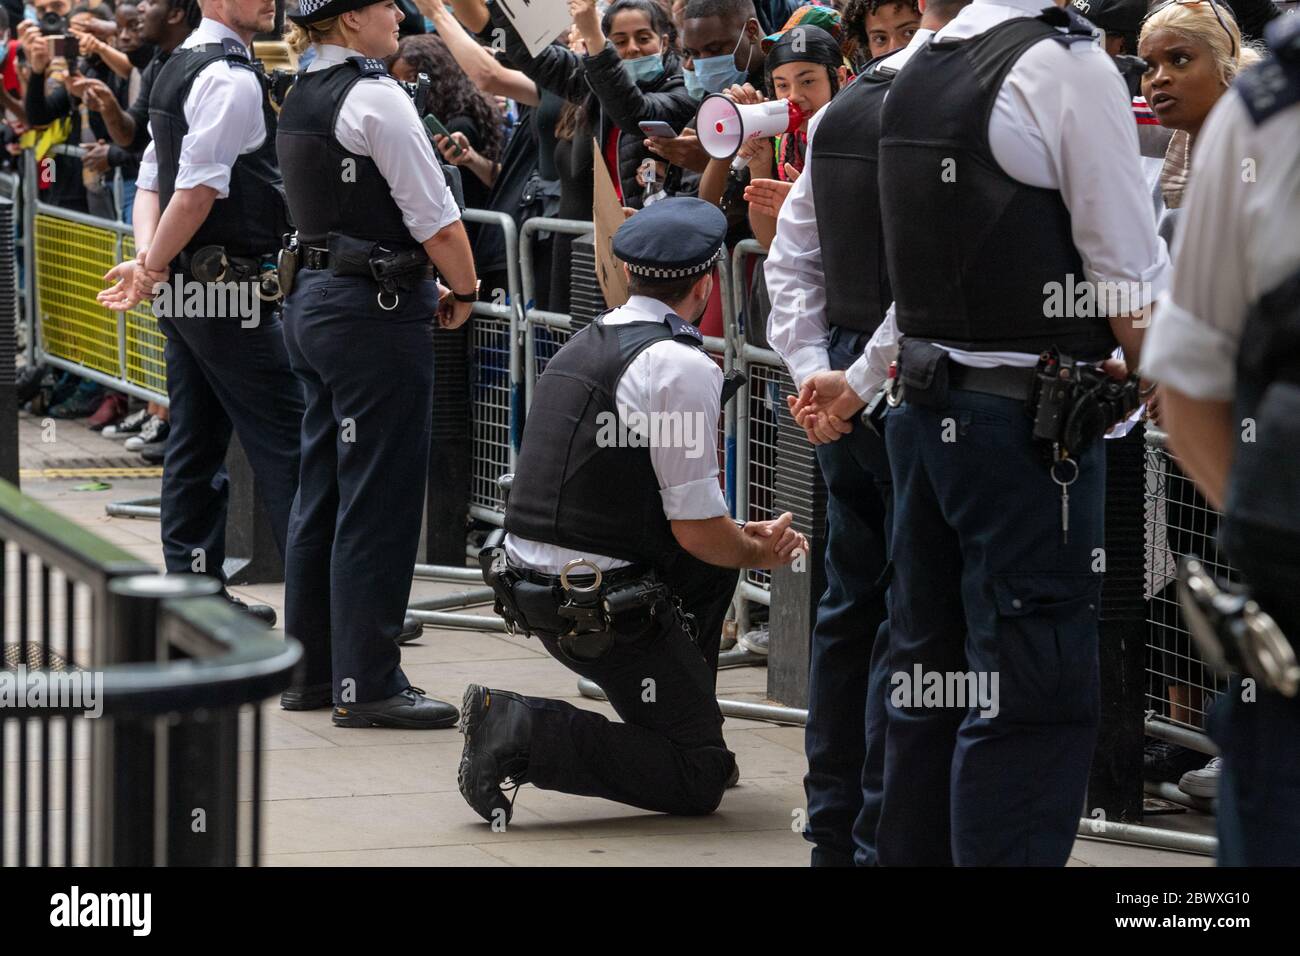 London, UK. 3rd June, 2020. British police officers 'take the knee' outside Downing Street during the 'Black lives matter' demonstration Credit: Ian Davidson/Alamy Live News Stock Photo